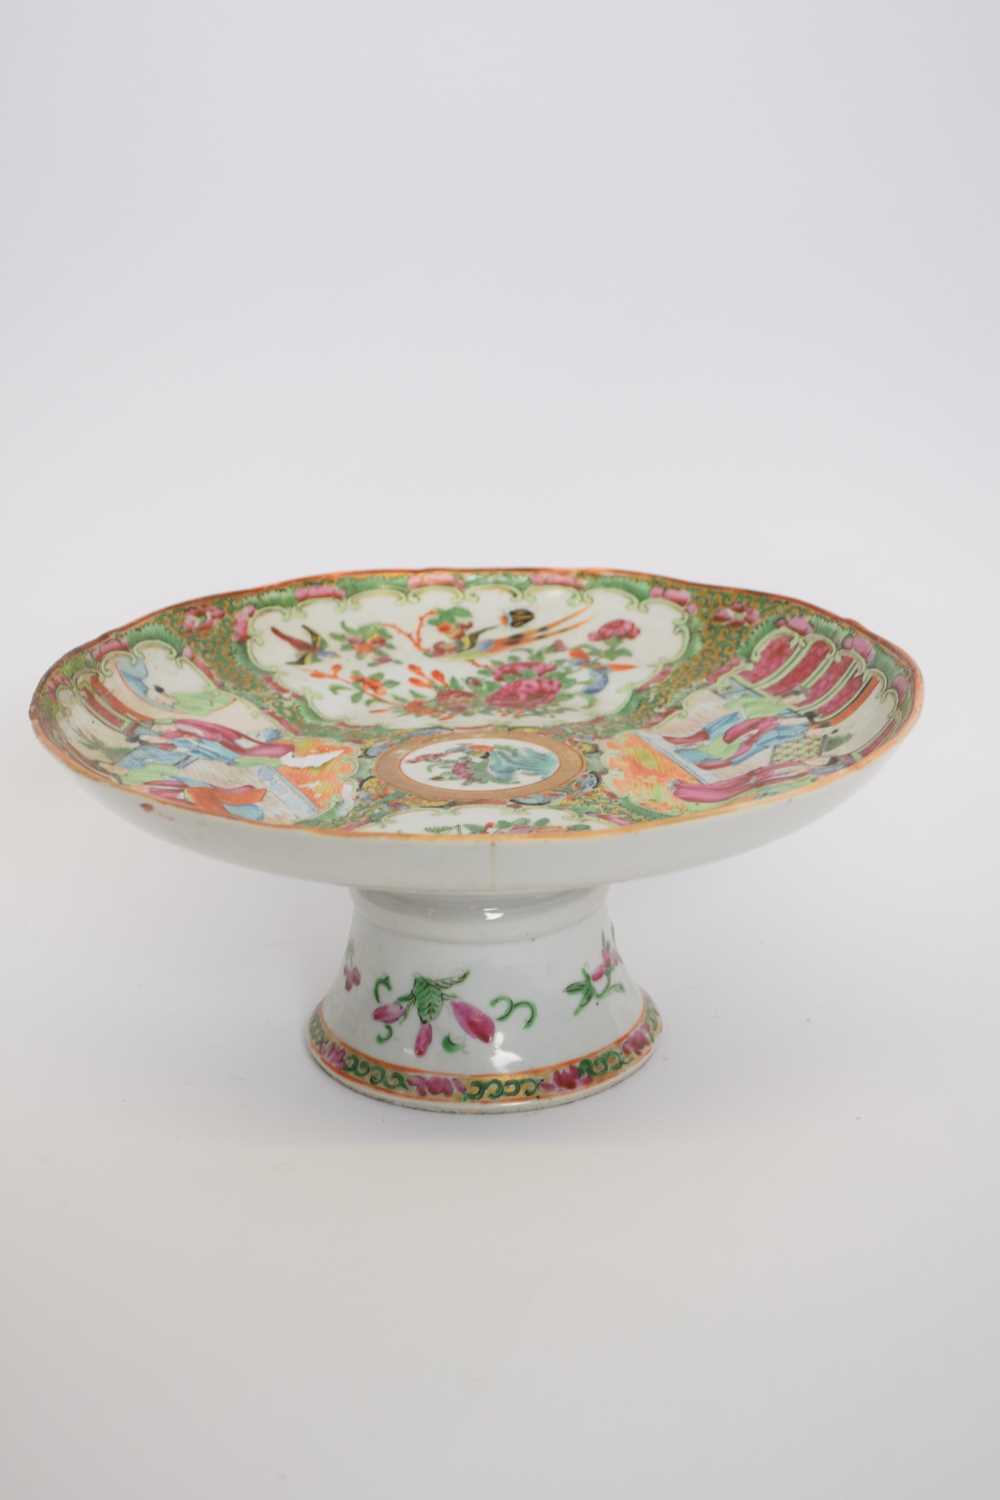 Cantonese porcelain tazza with typical designs of panels, figures, alternating with panels of - Image 5 of 8